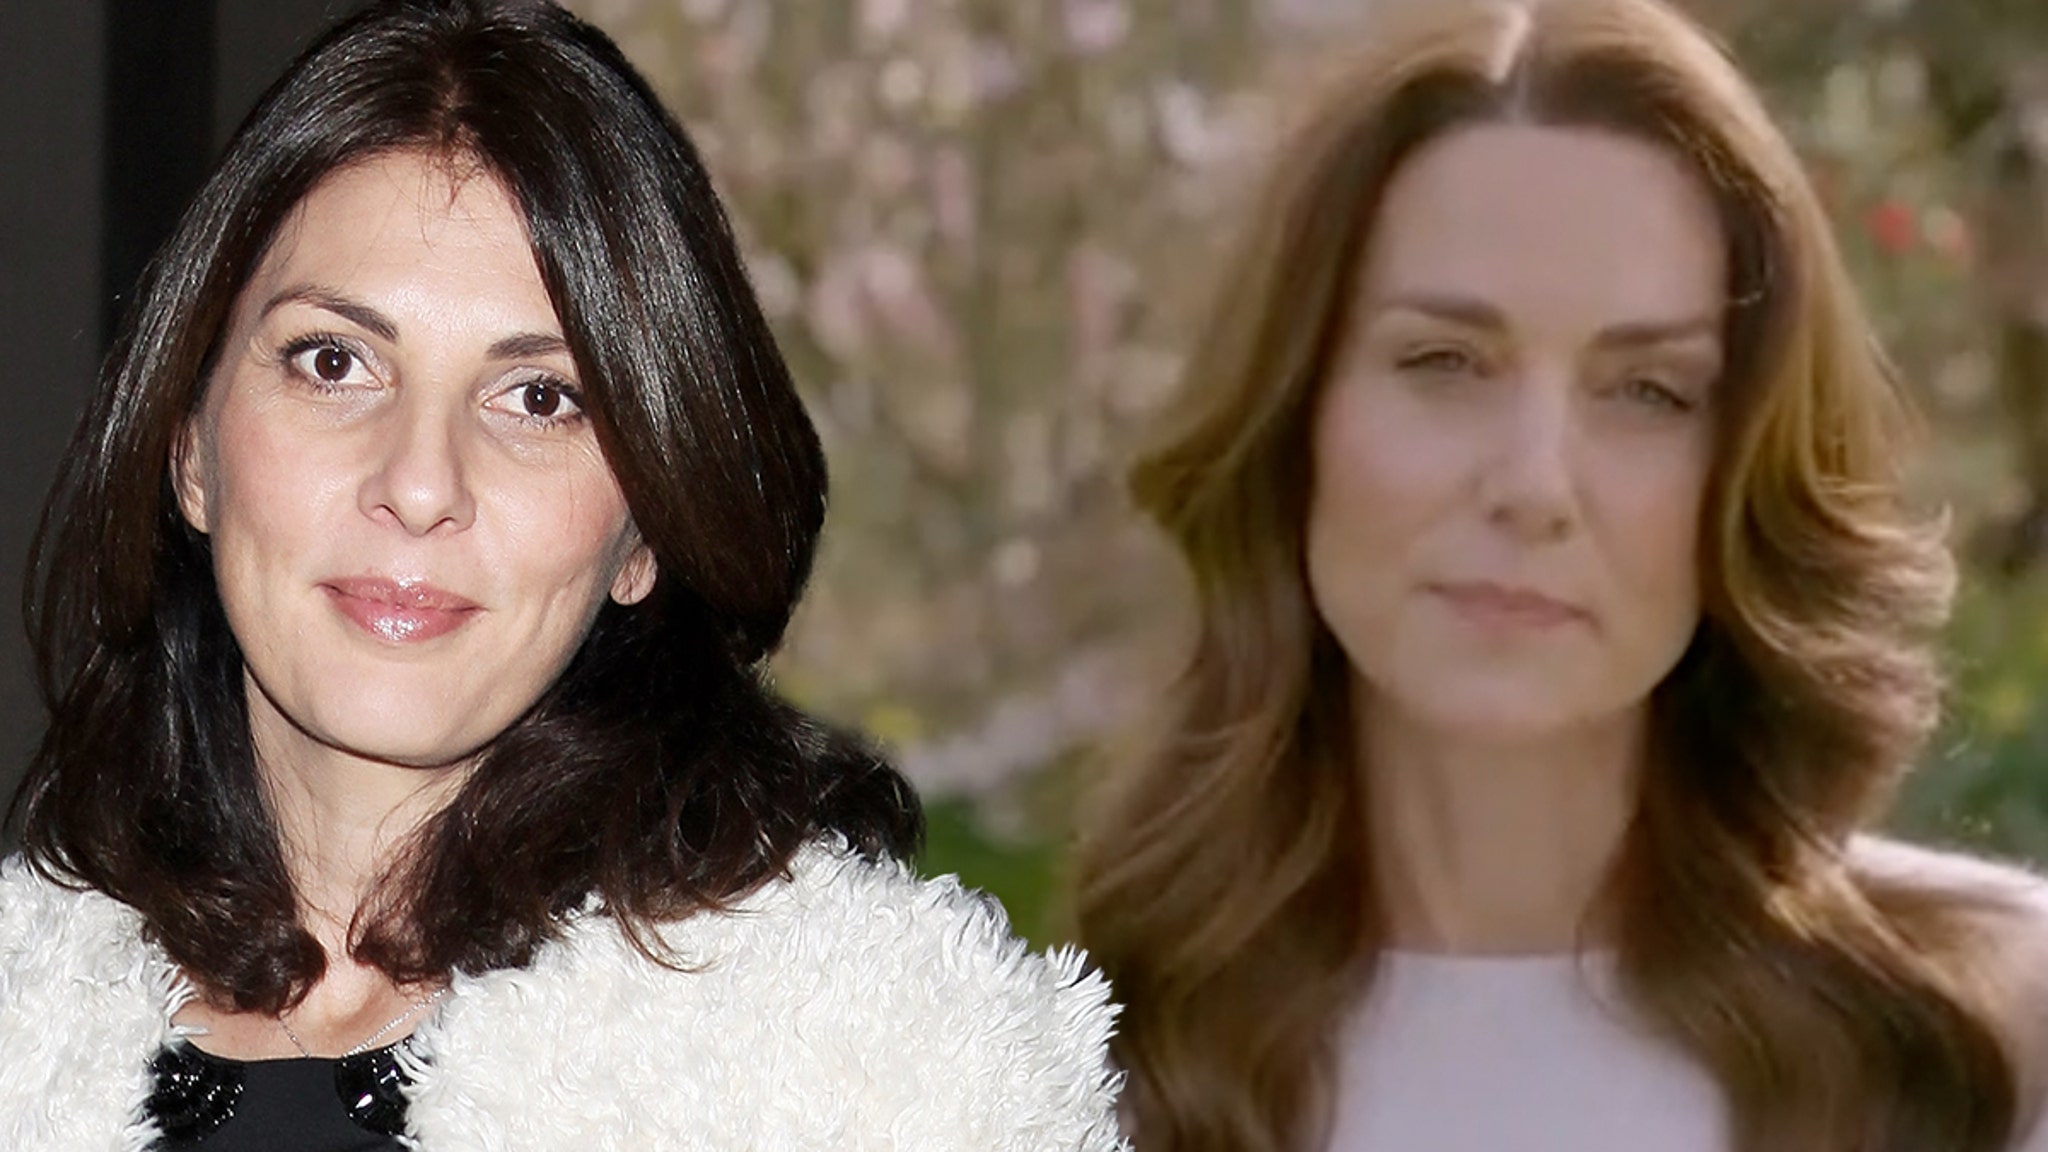 Actress Gina Bellman seems inspired by Kate Middleton to reveal her own cancer